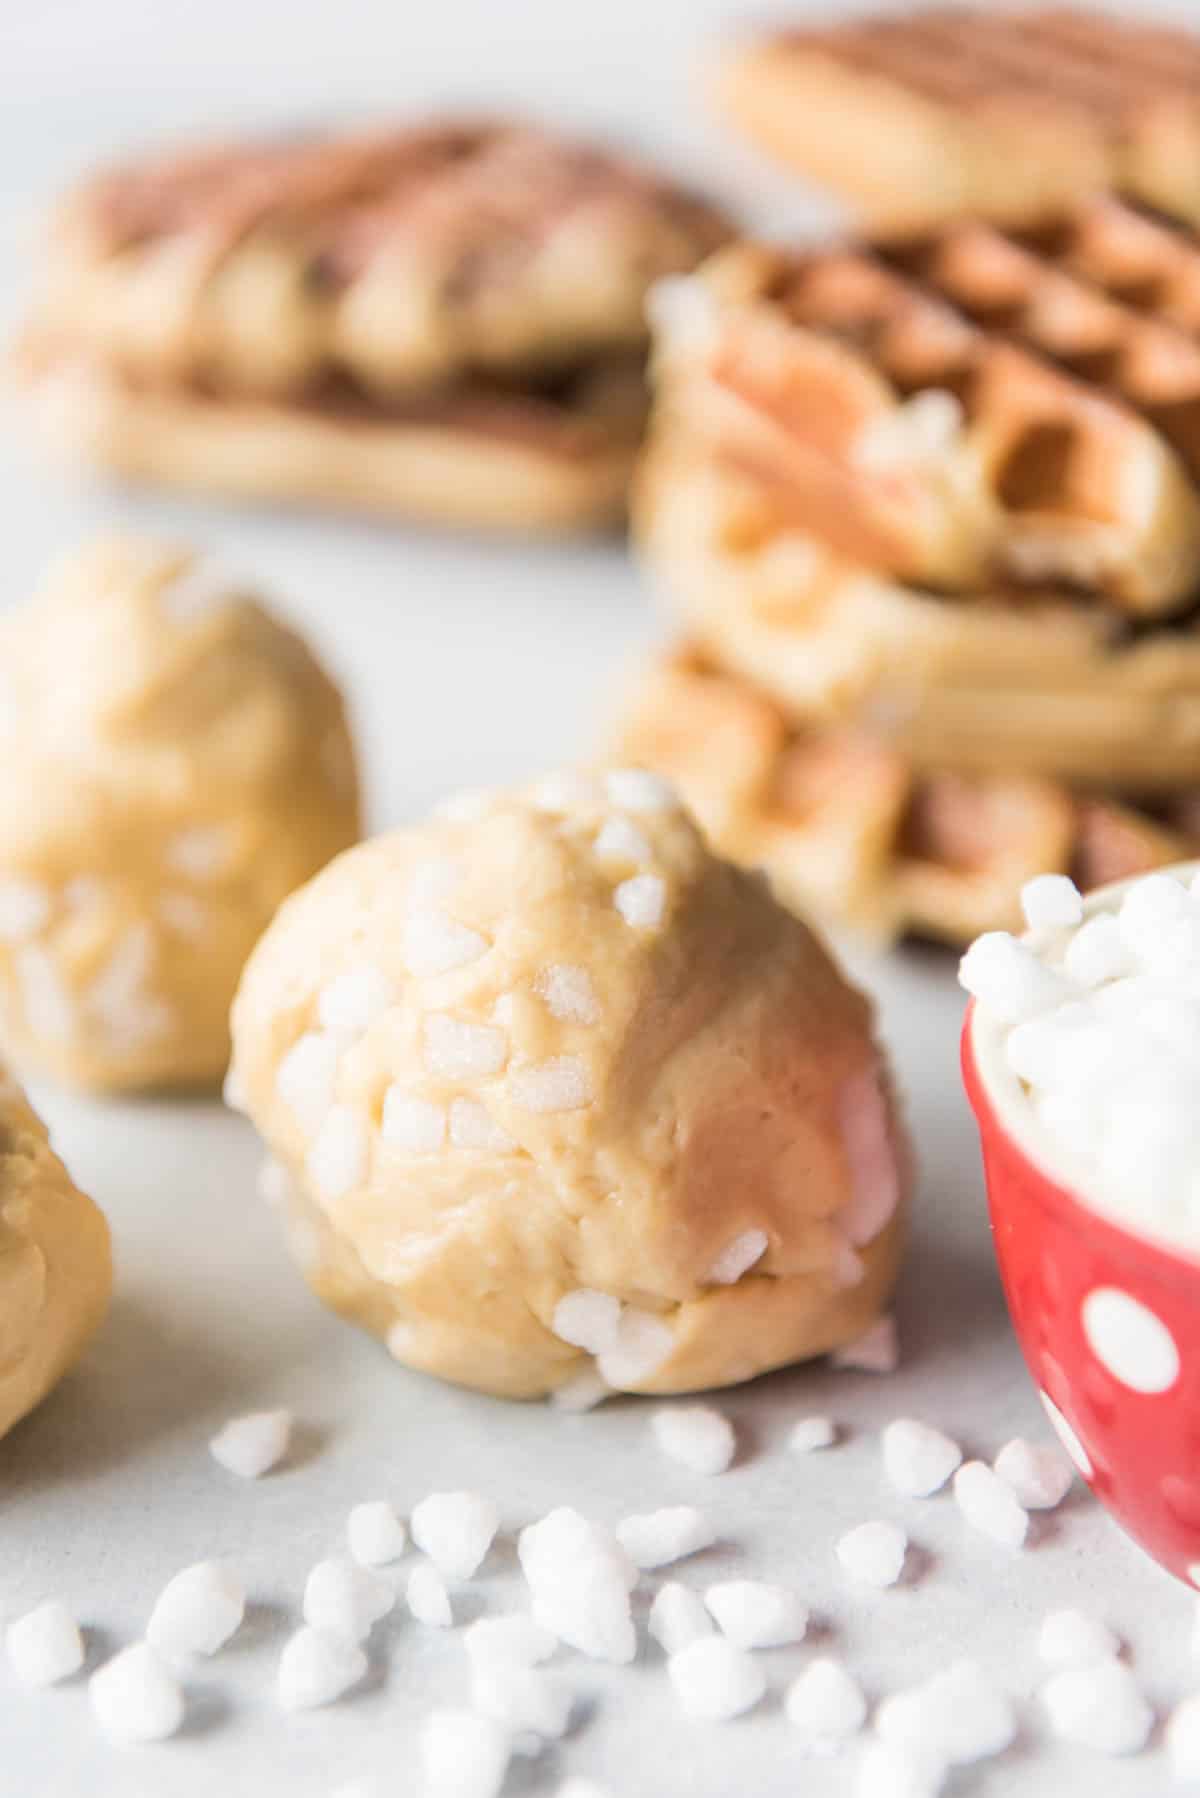 Balls of liege waffle dough with sugar pearls next to stacks of waffles.